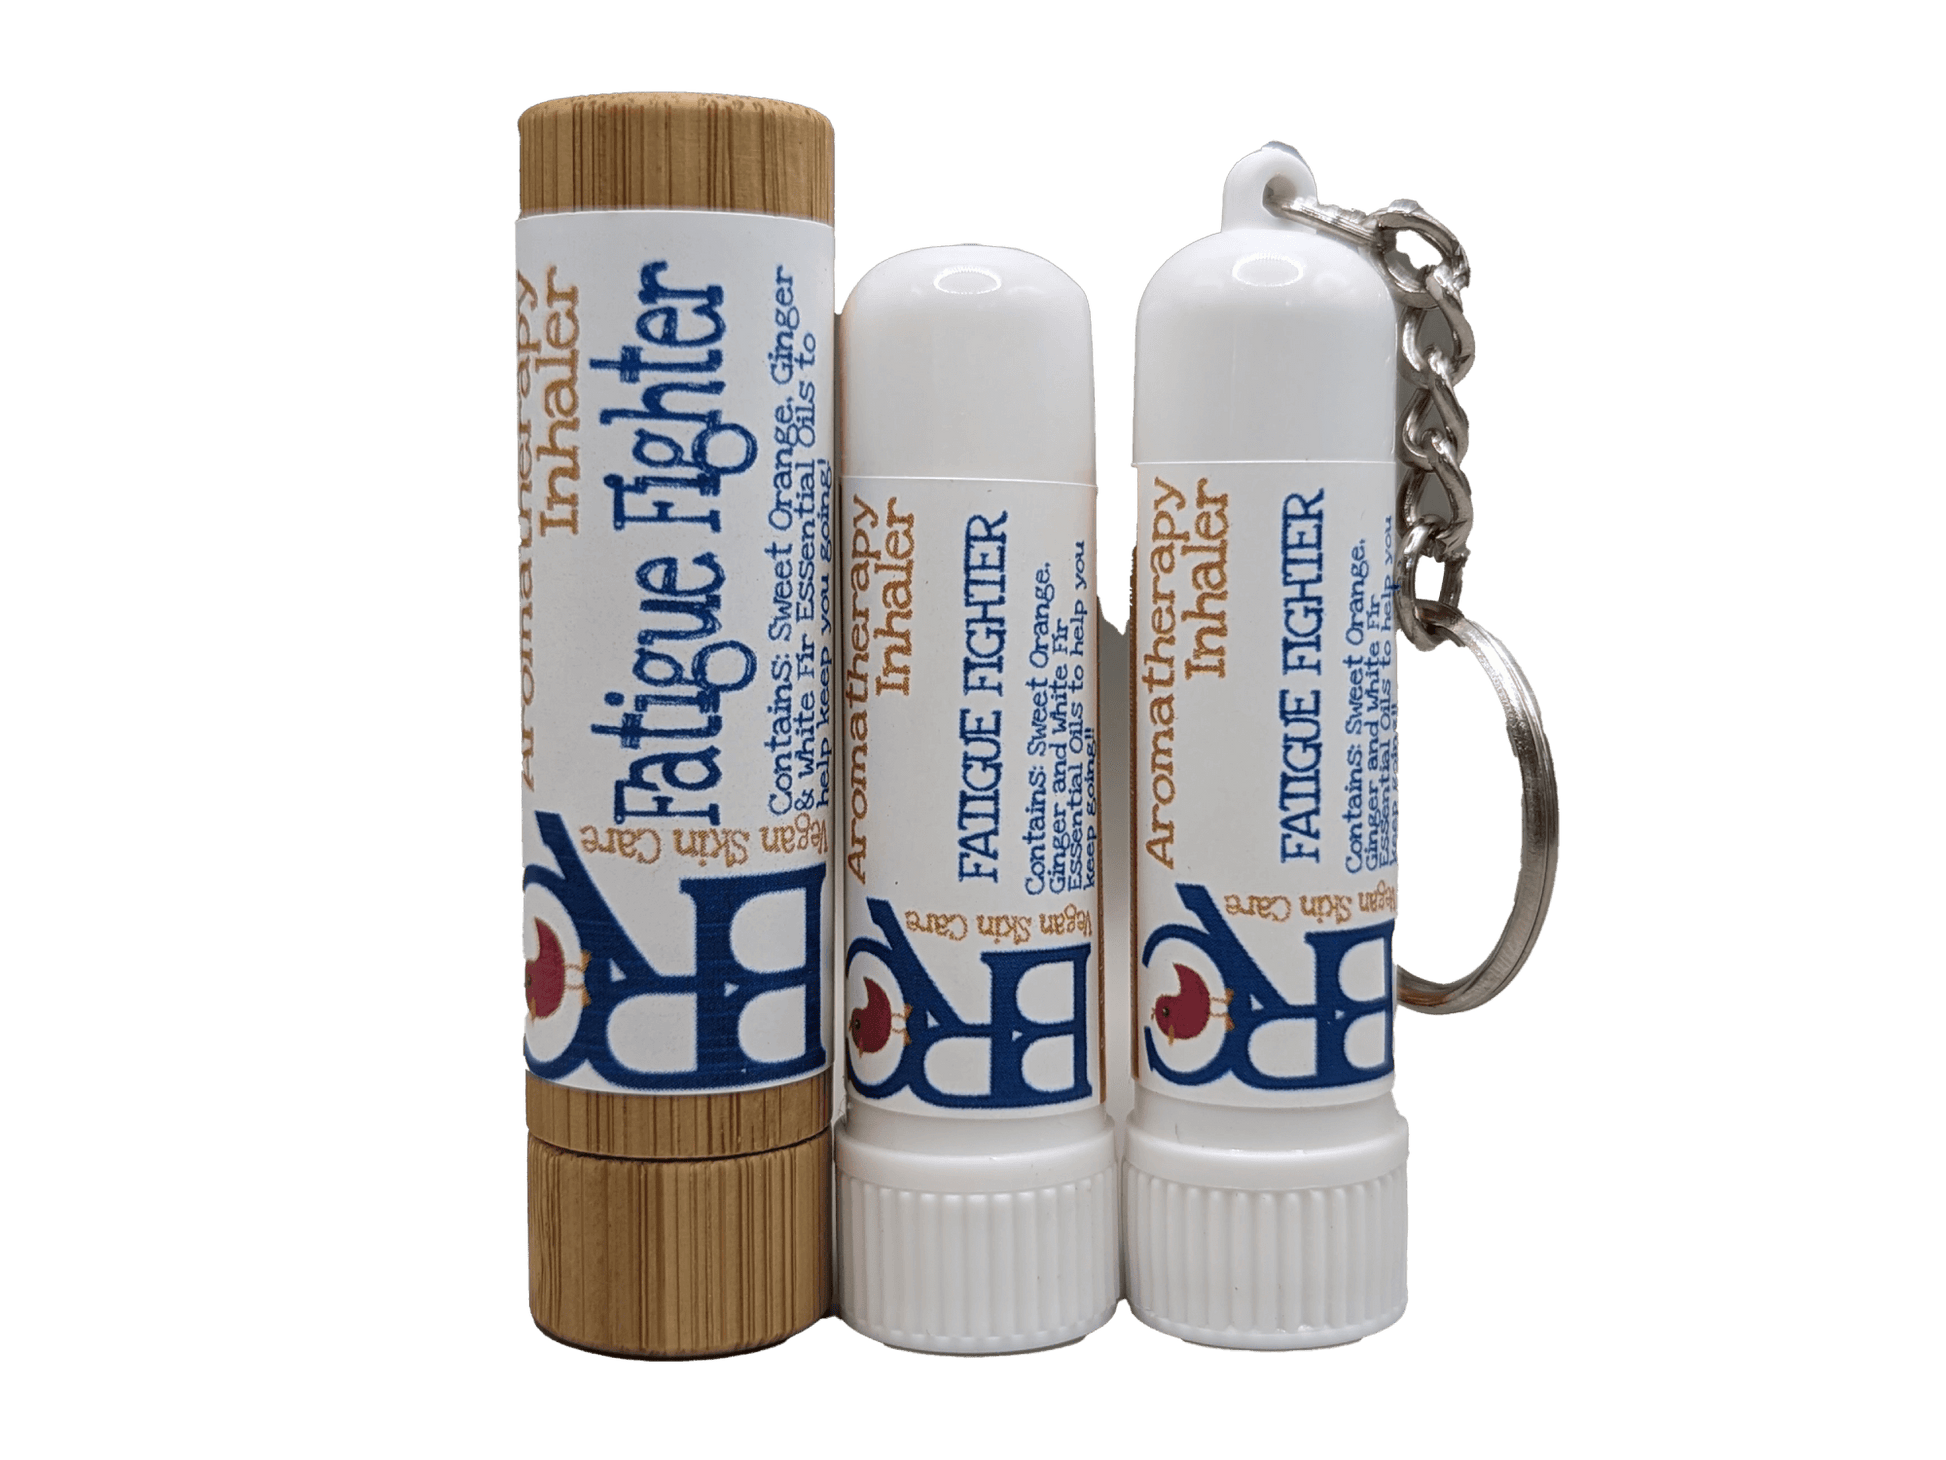 Fatigue Fighter Aromatherapy Inhaler | By Robin Creations 